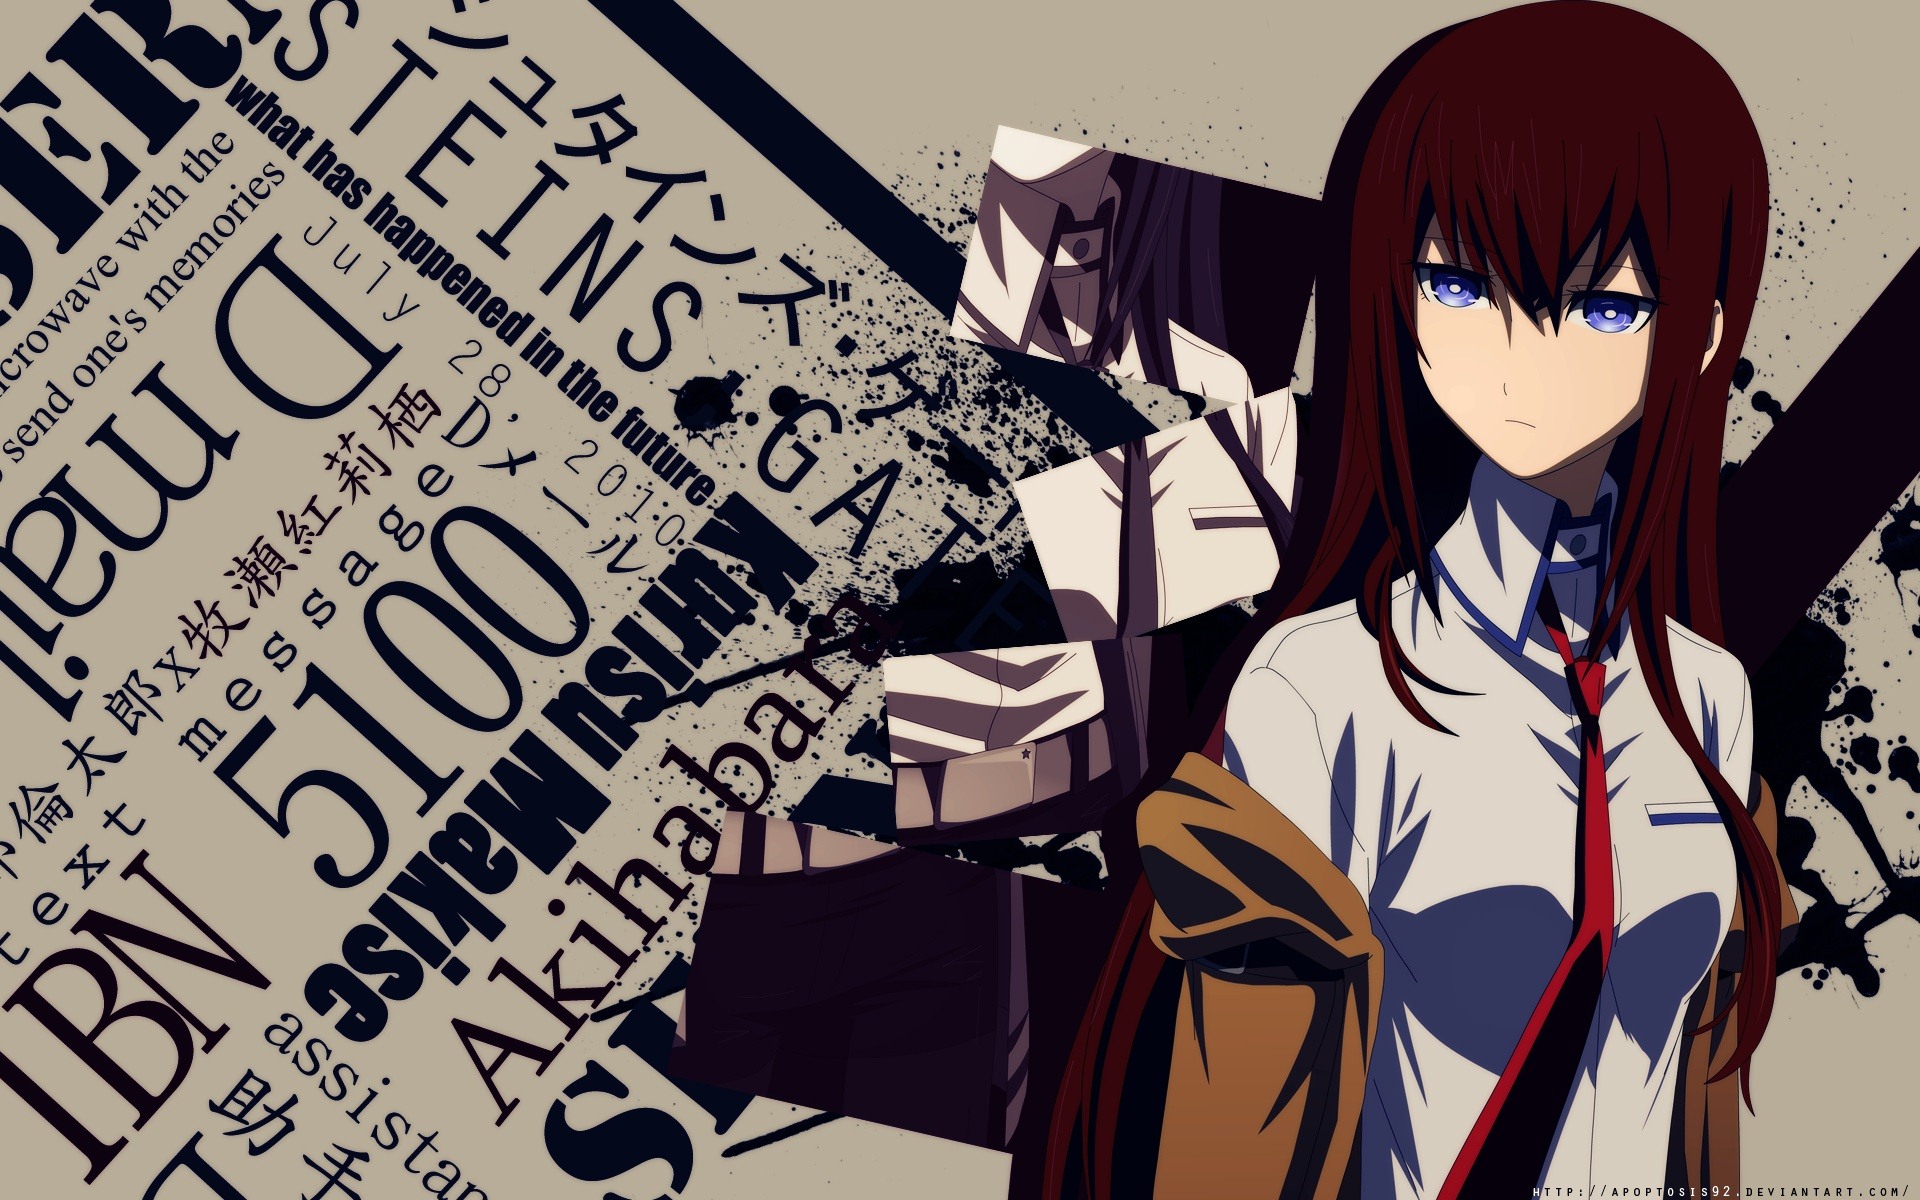 Kurisu Makise Wallpaper posted by Ethan Sellers